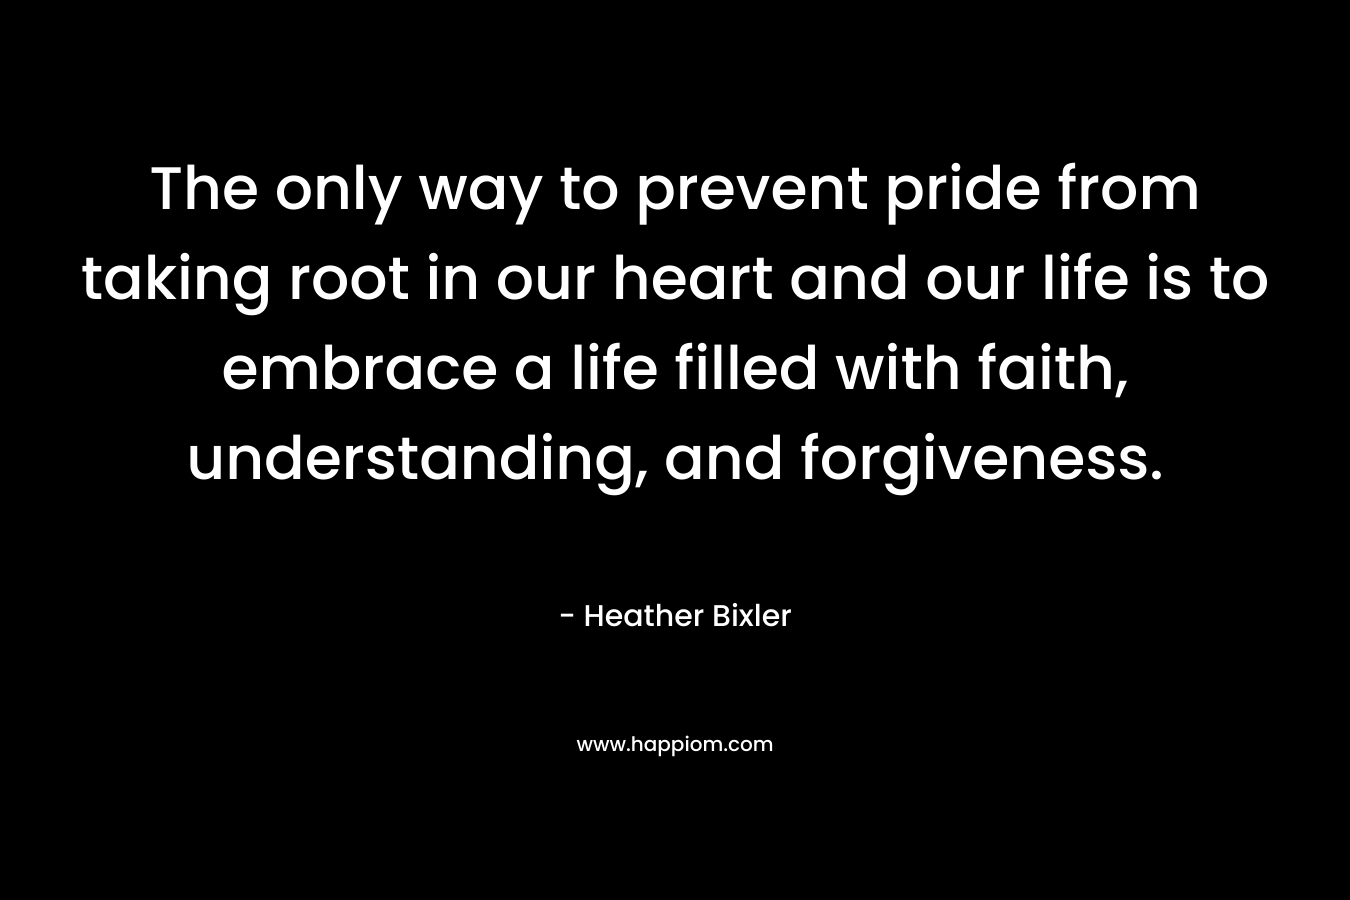 The only way to prevent pride from taking root in our heart and our life is to embrace a life filled with faith, understanding, and forgiveness. – Heather Bixler